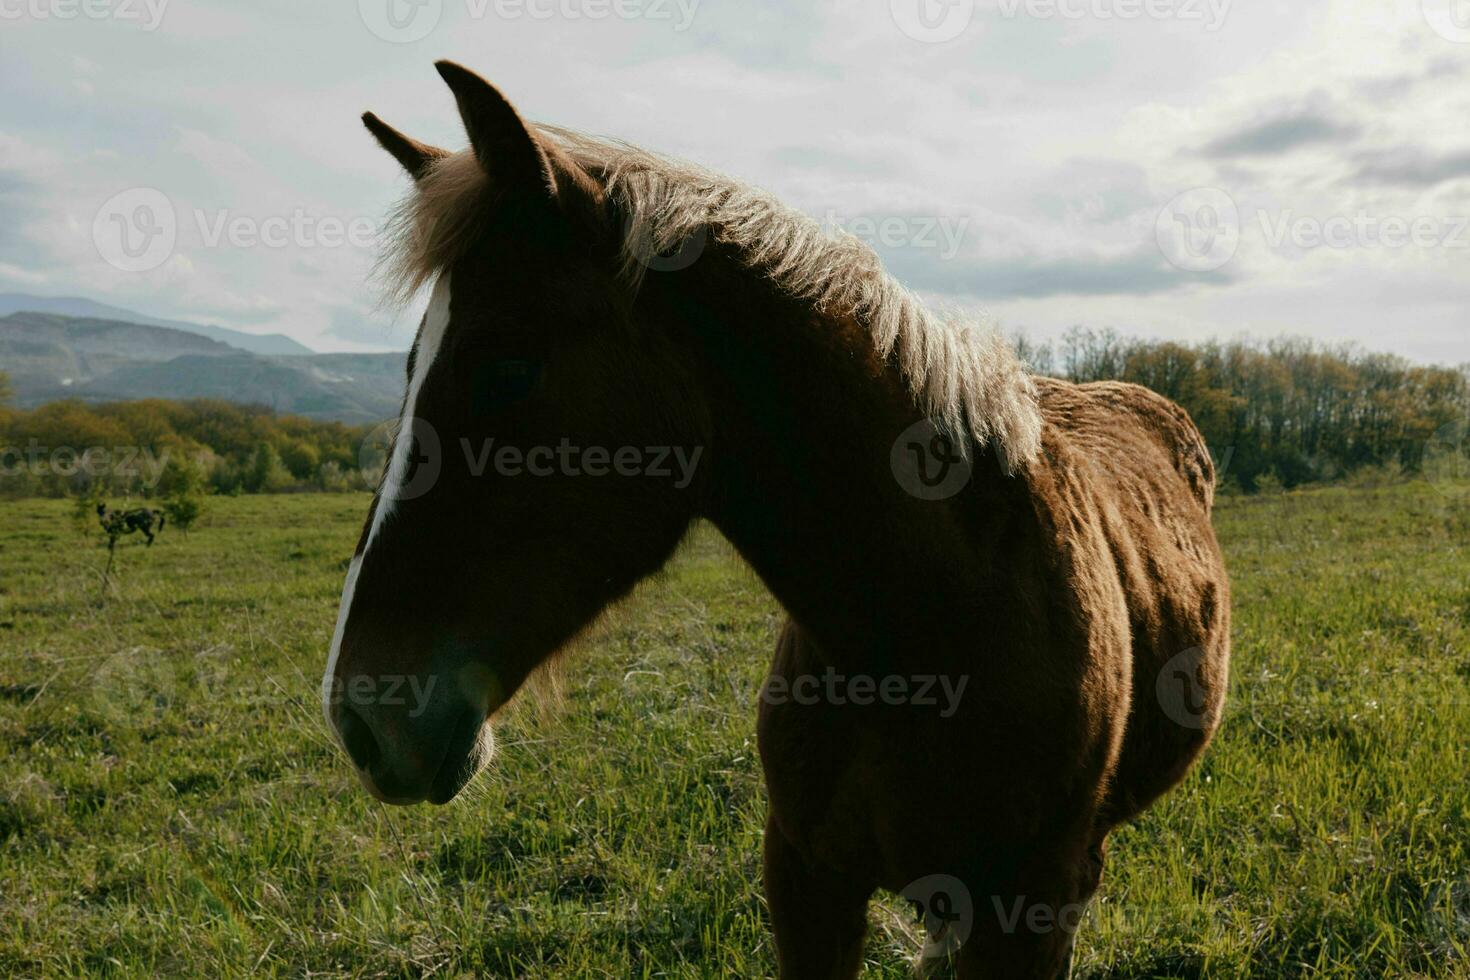 Herd of horses in the field nature mammals landscape animals photo